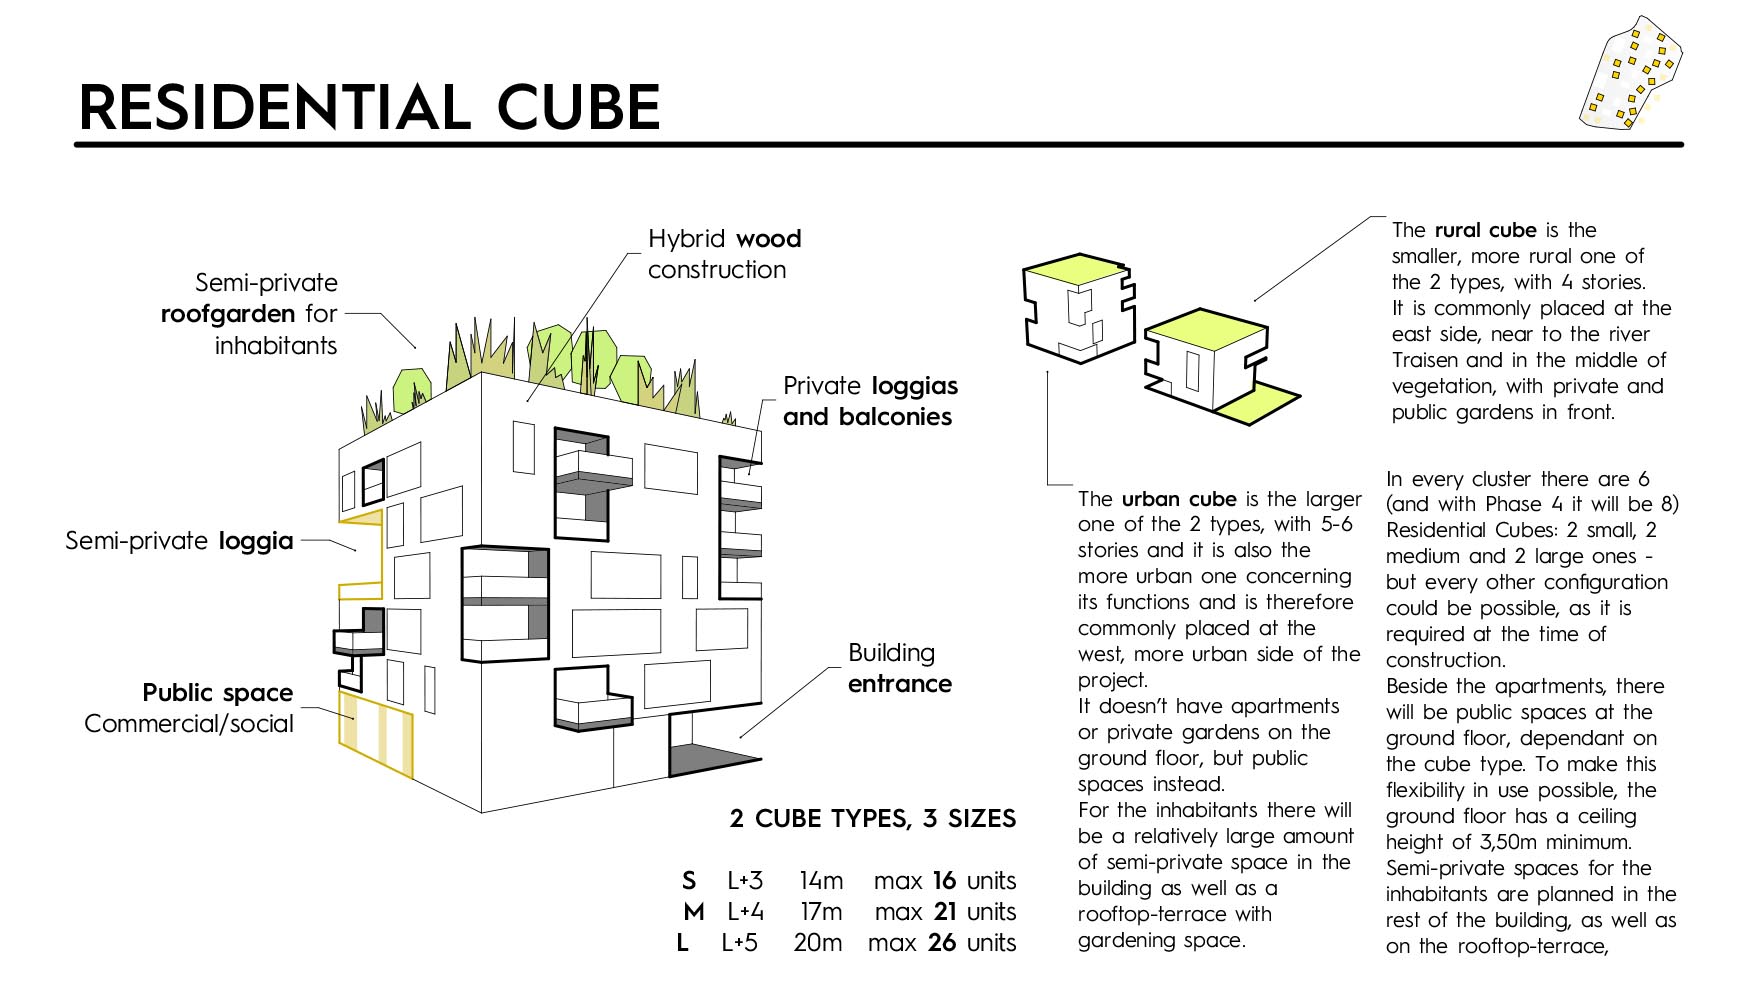 cy architecture_Wettbewerb Europan 13_residential cube